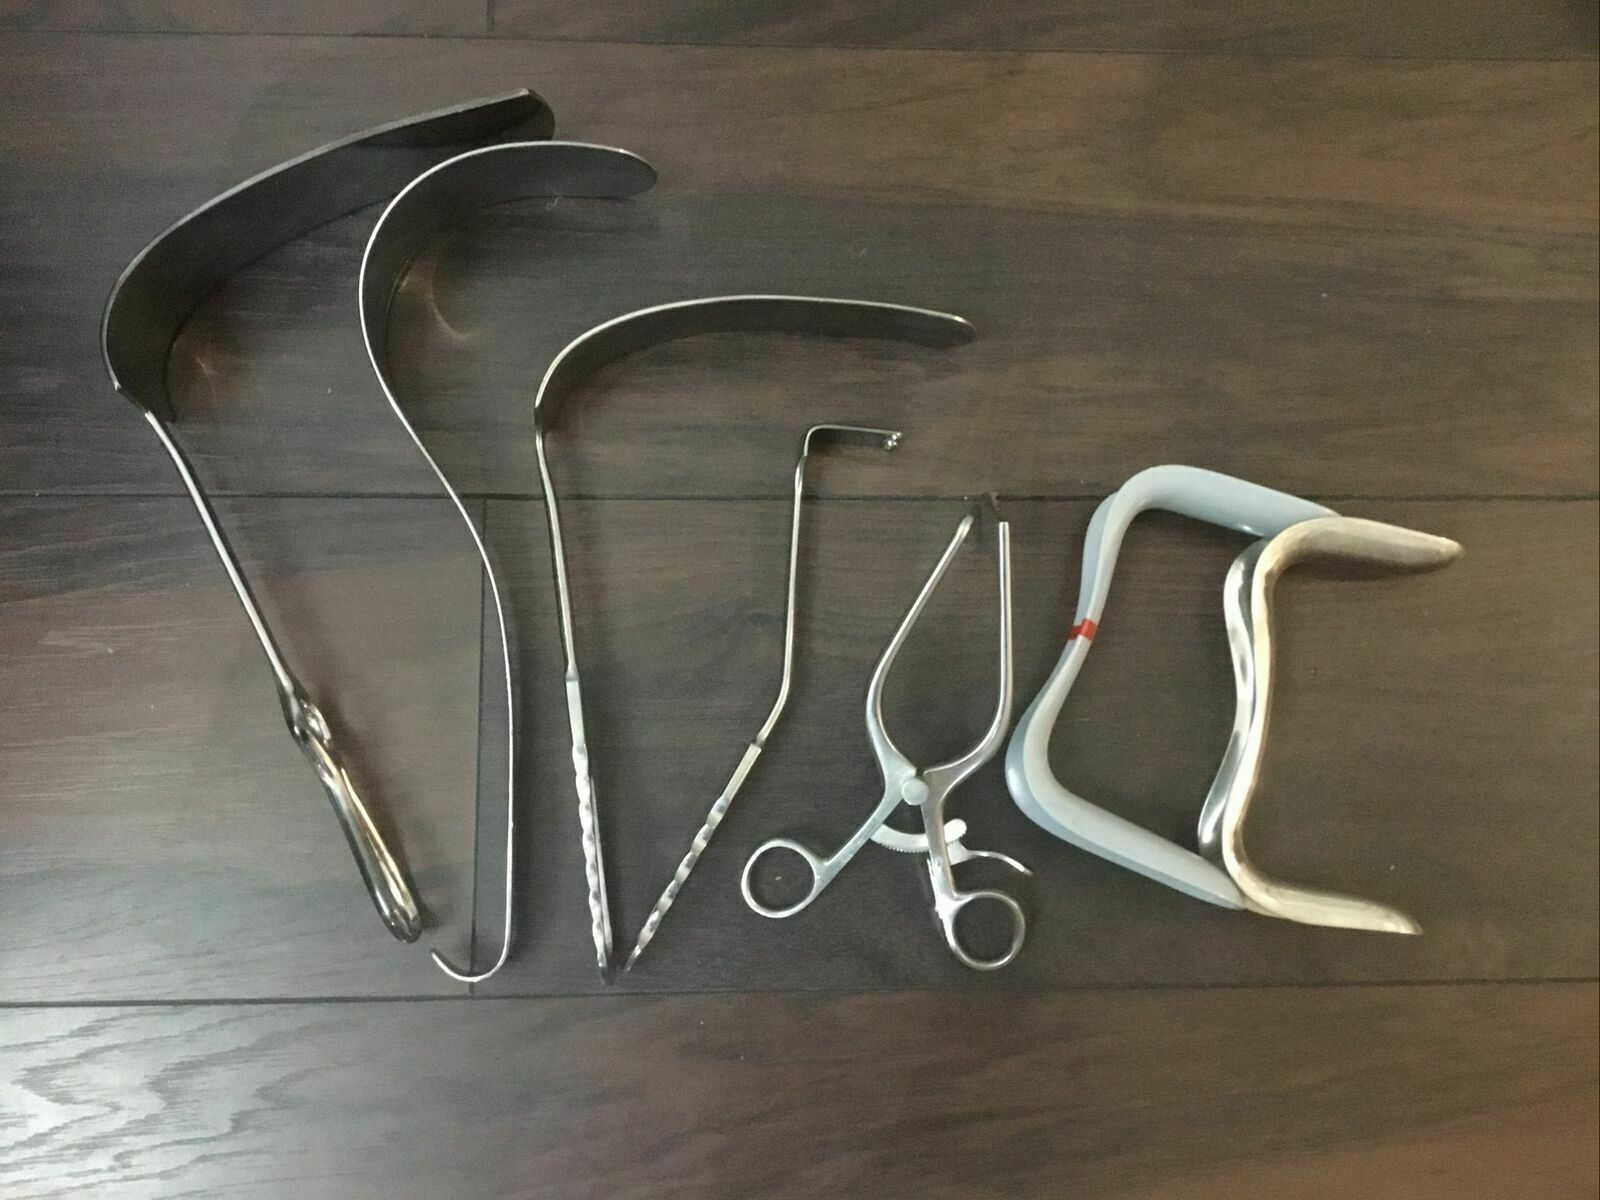 LOT of Surgical retractors speculum retaining hospital Home surgery theater use - $158.32